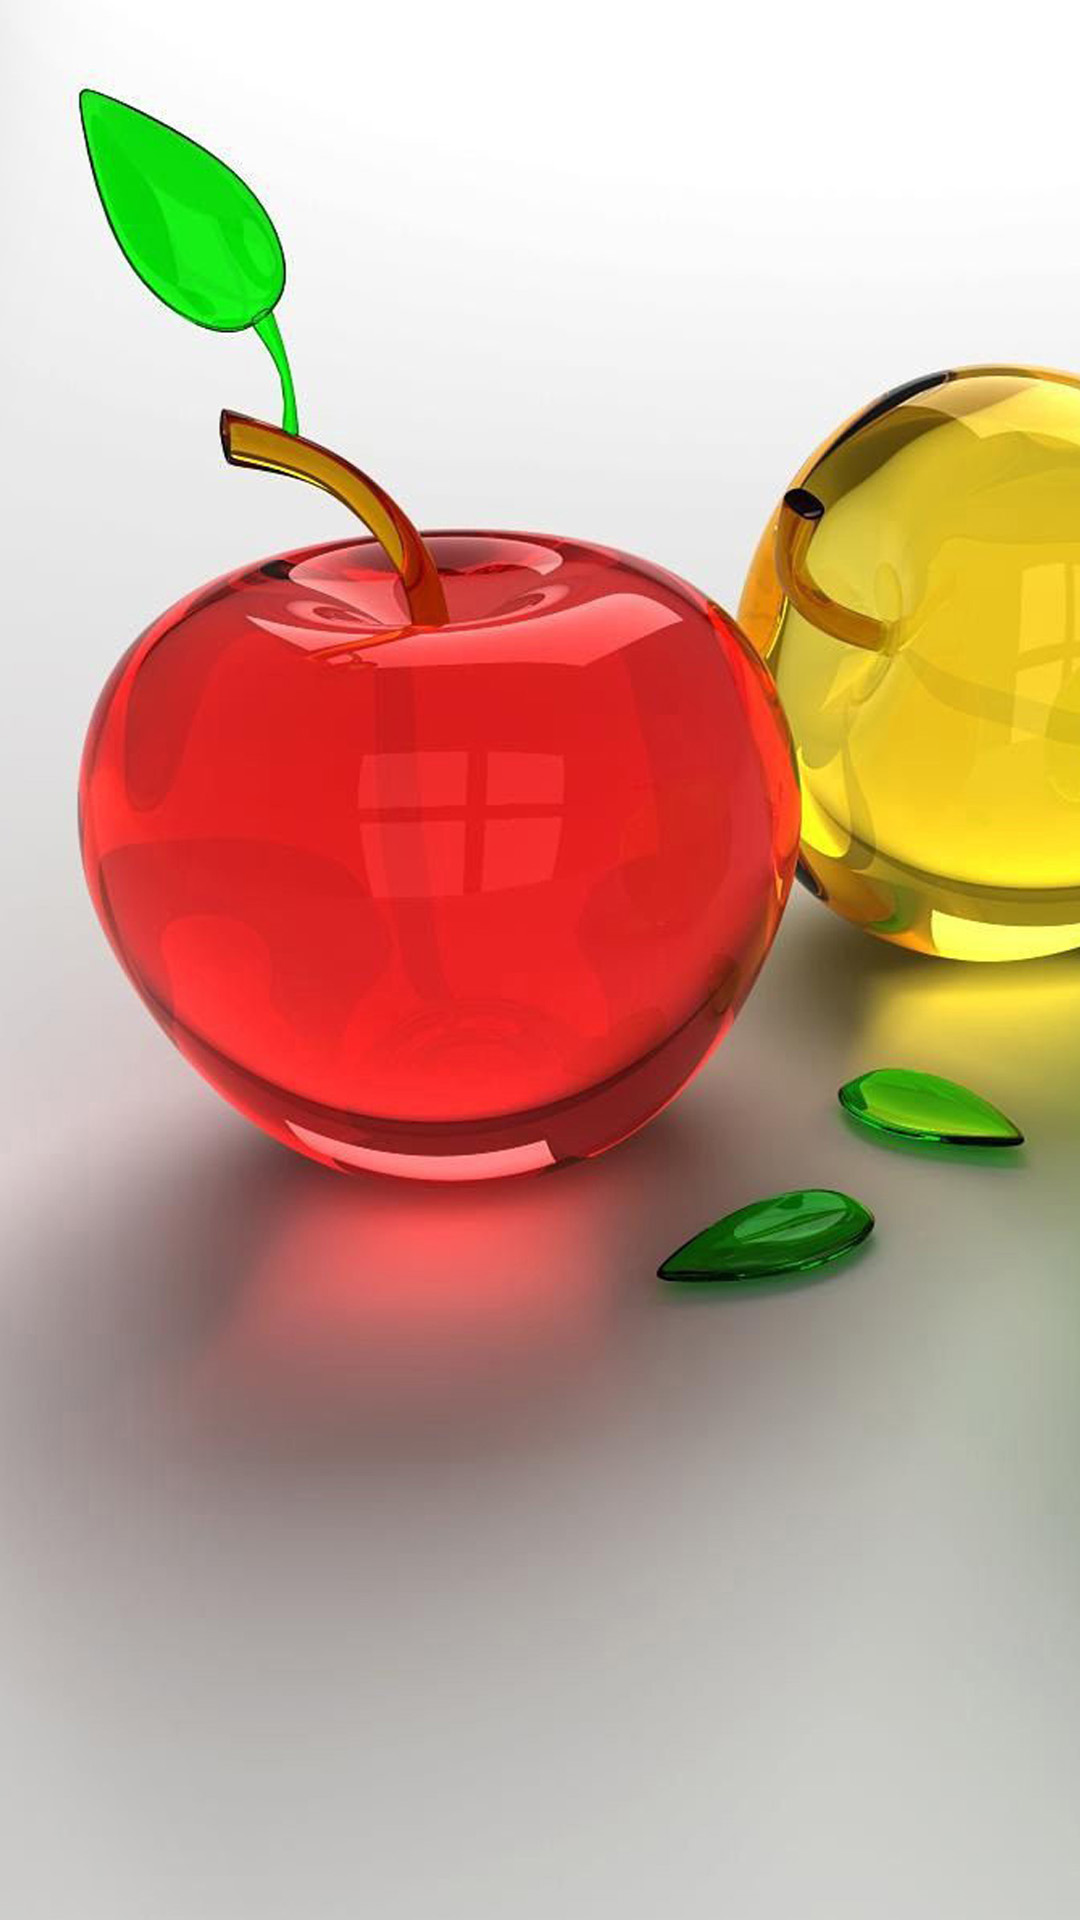 Apple iPhone Background 3d Wallpaper For Mobile